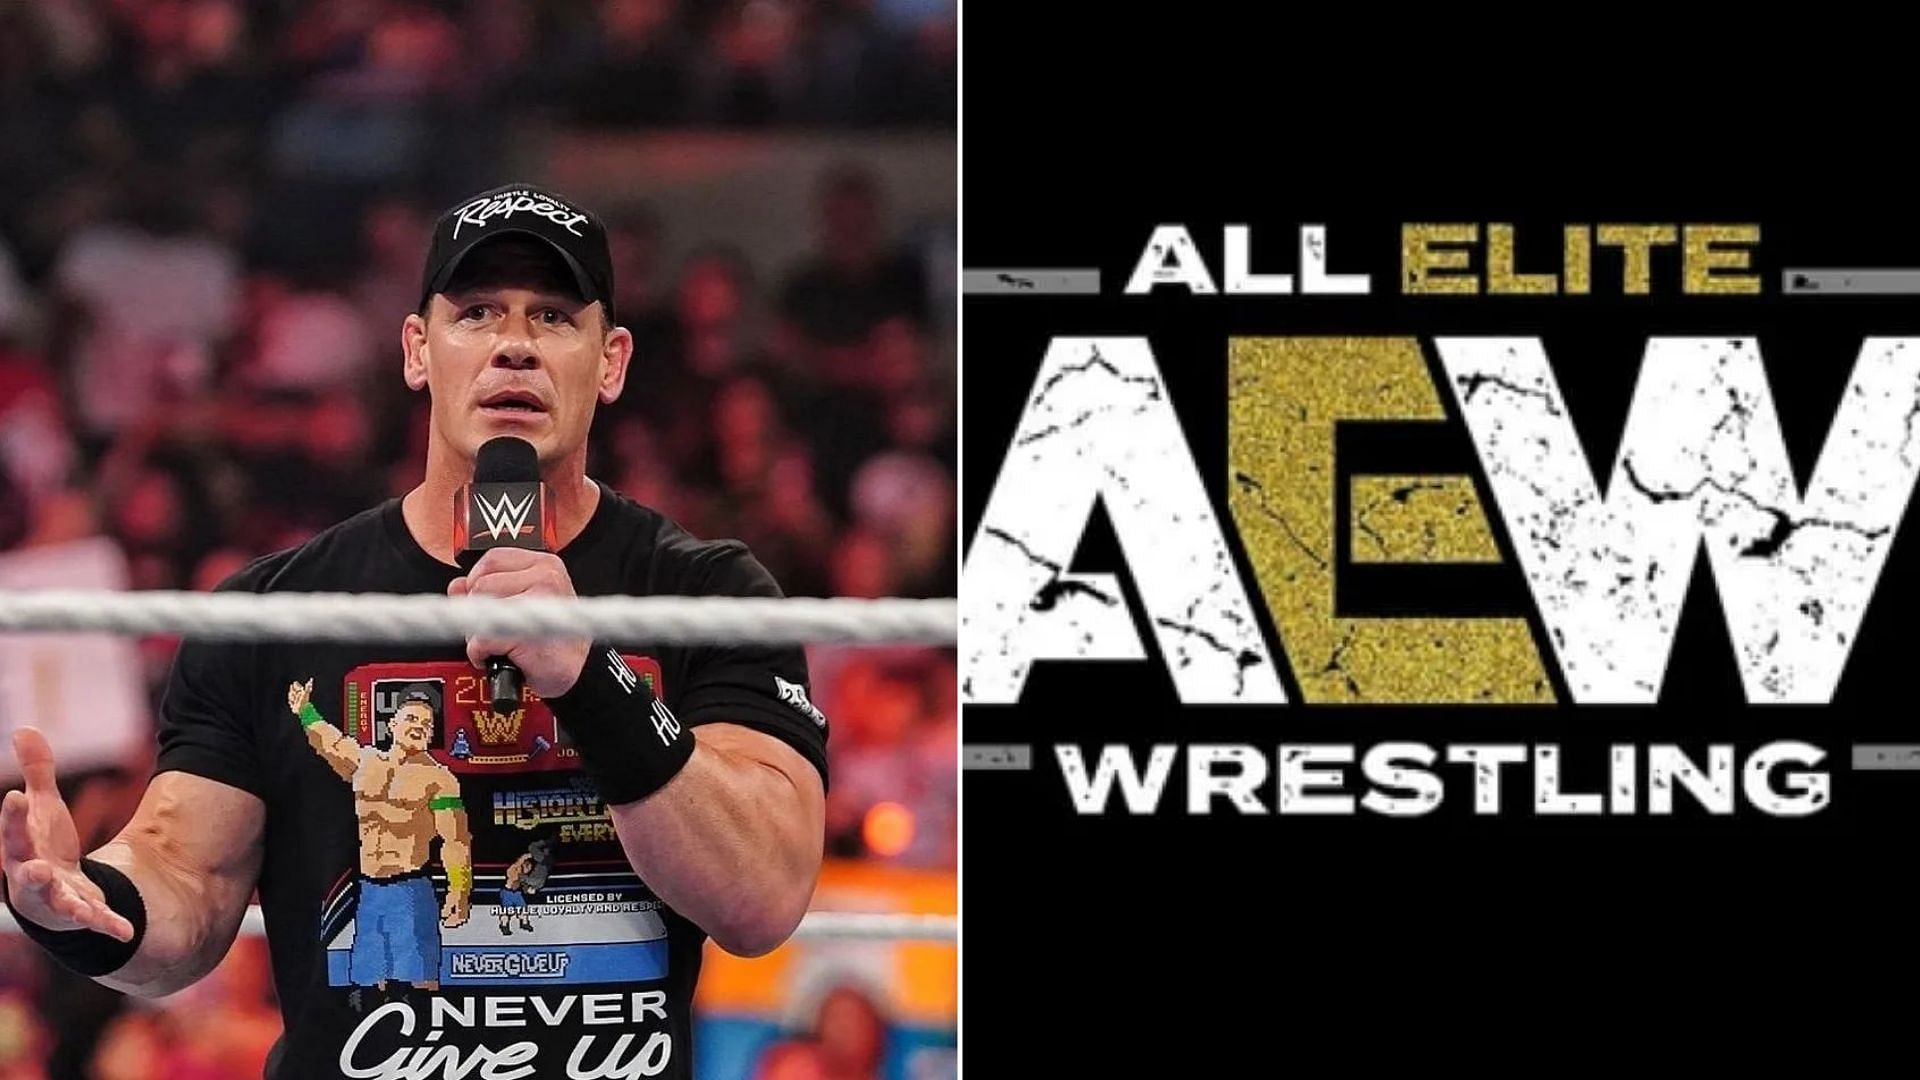 Another All Elite star had words for John Cena on his 20th anniversary